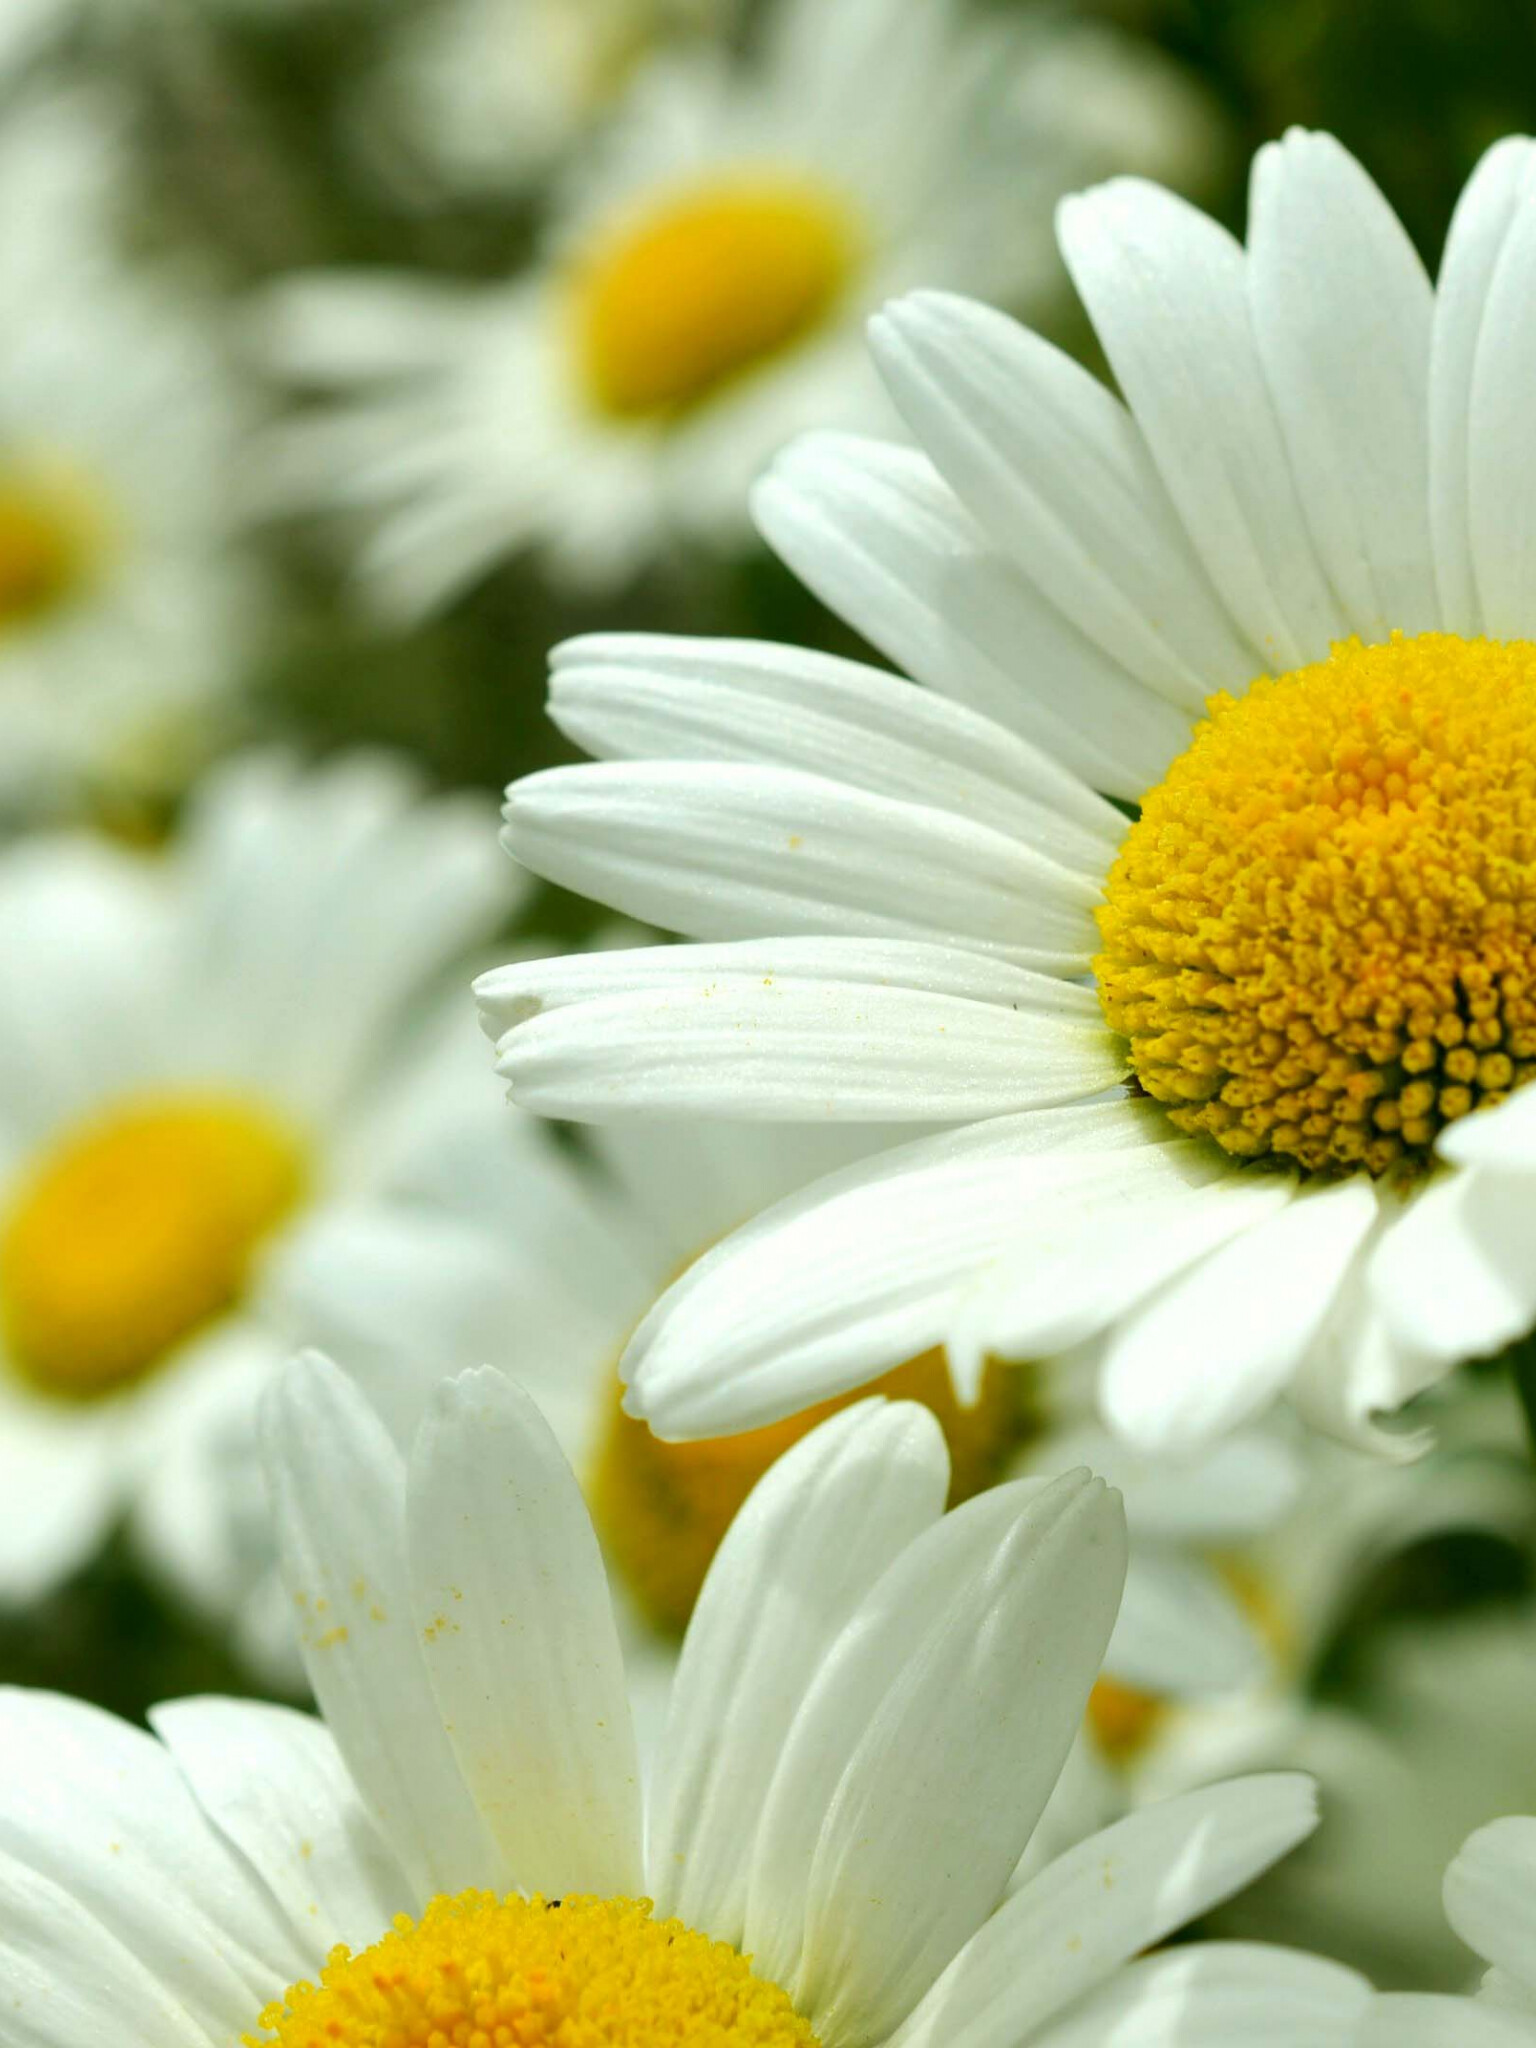 Daisy: Daisies, just like their cheerful appearance would suggest, are sun-loving plants. 1540x2050 HD Wallpaper.